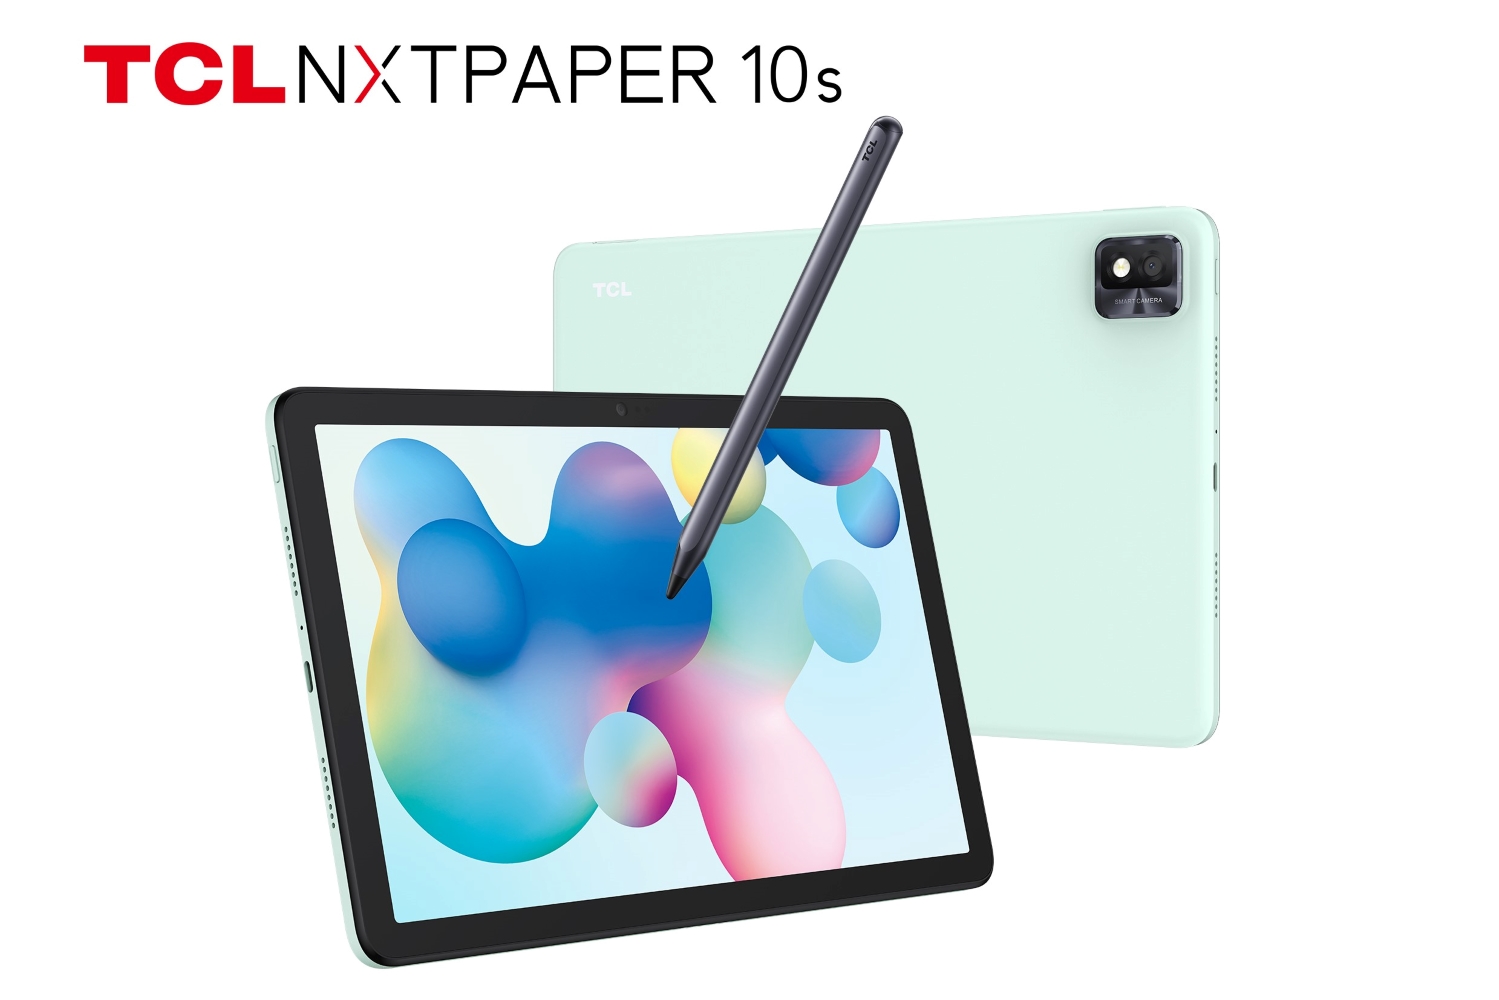 TCL Reveals New Full-Color NXTPAPER 10S At CES 2022